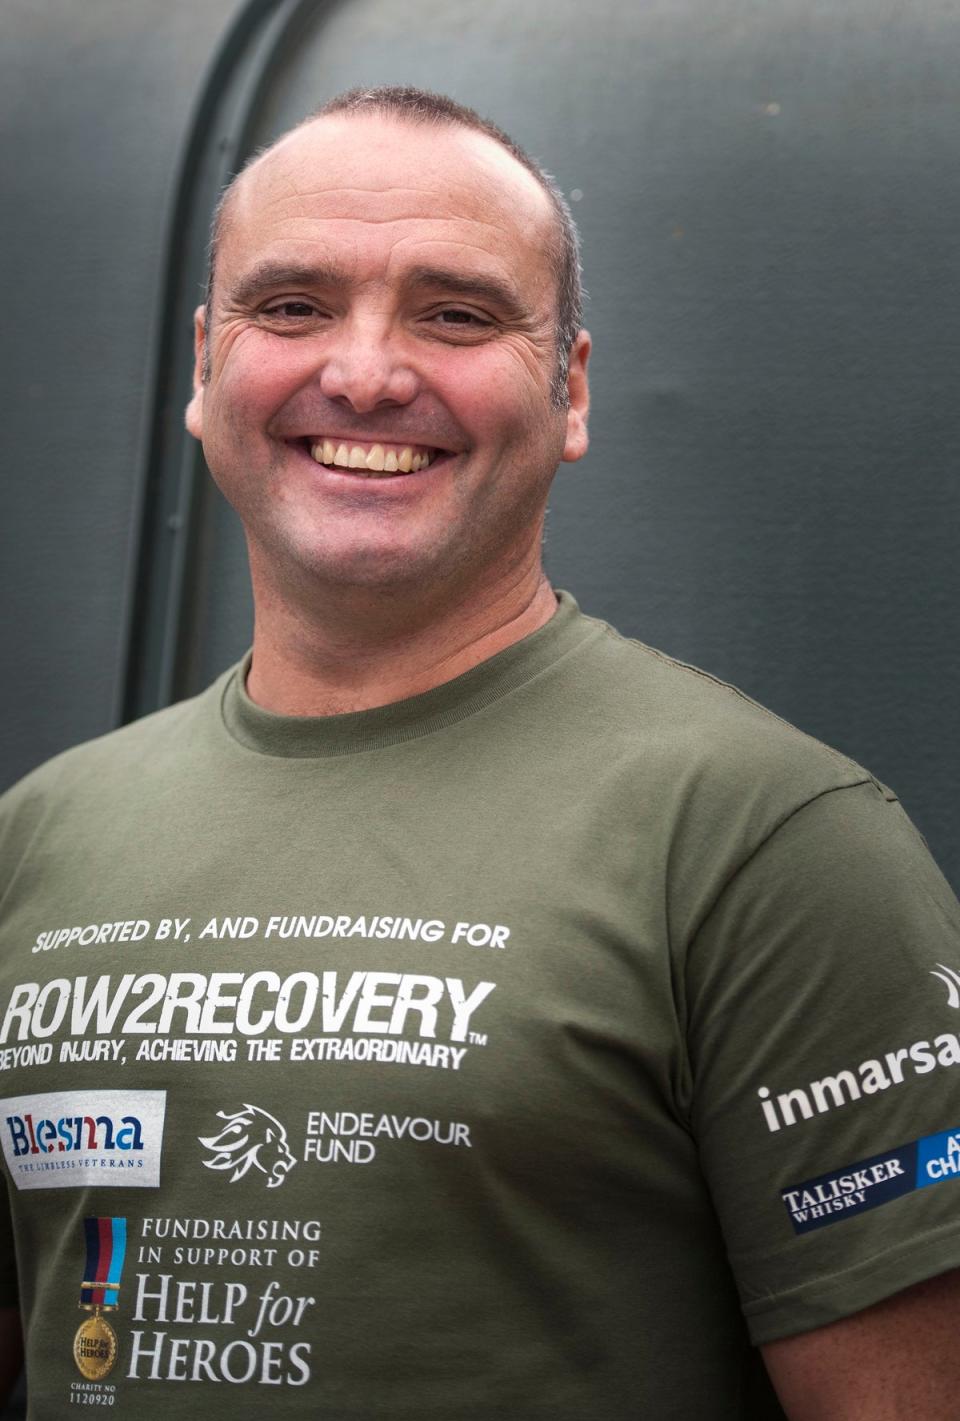 Lee Spencer has already raised more than £26,000 for The Royal Marines Charity via his fundraising page for his latest expedition (Lauren Hurley/PA) (PA Archive)